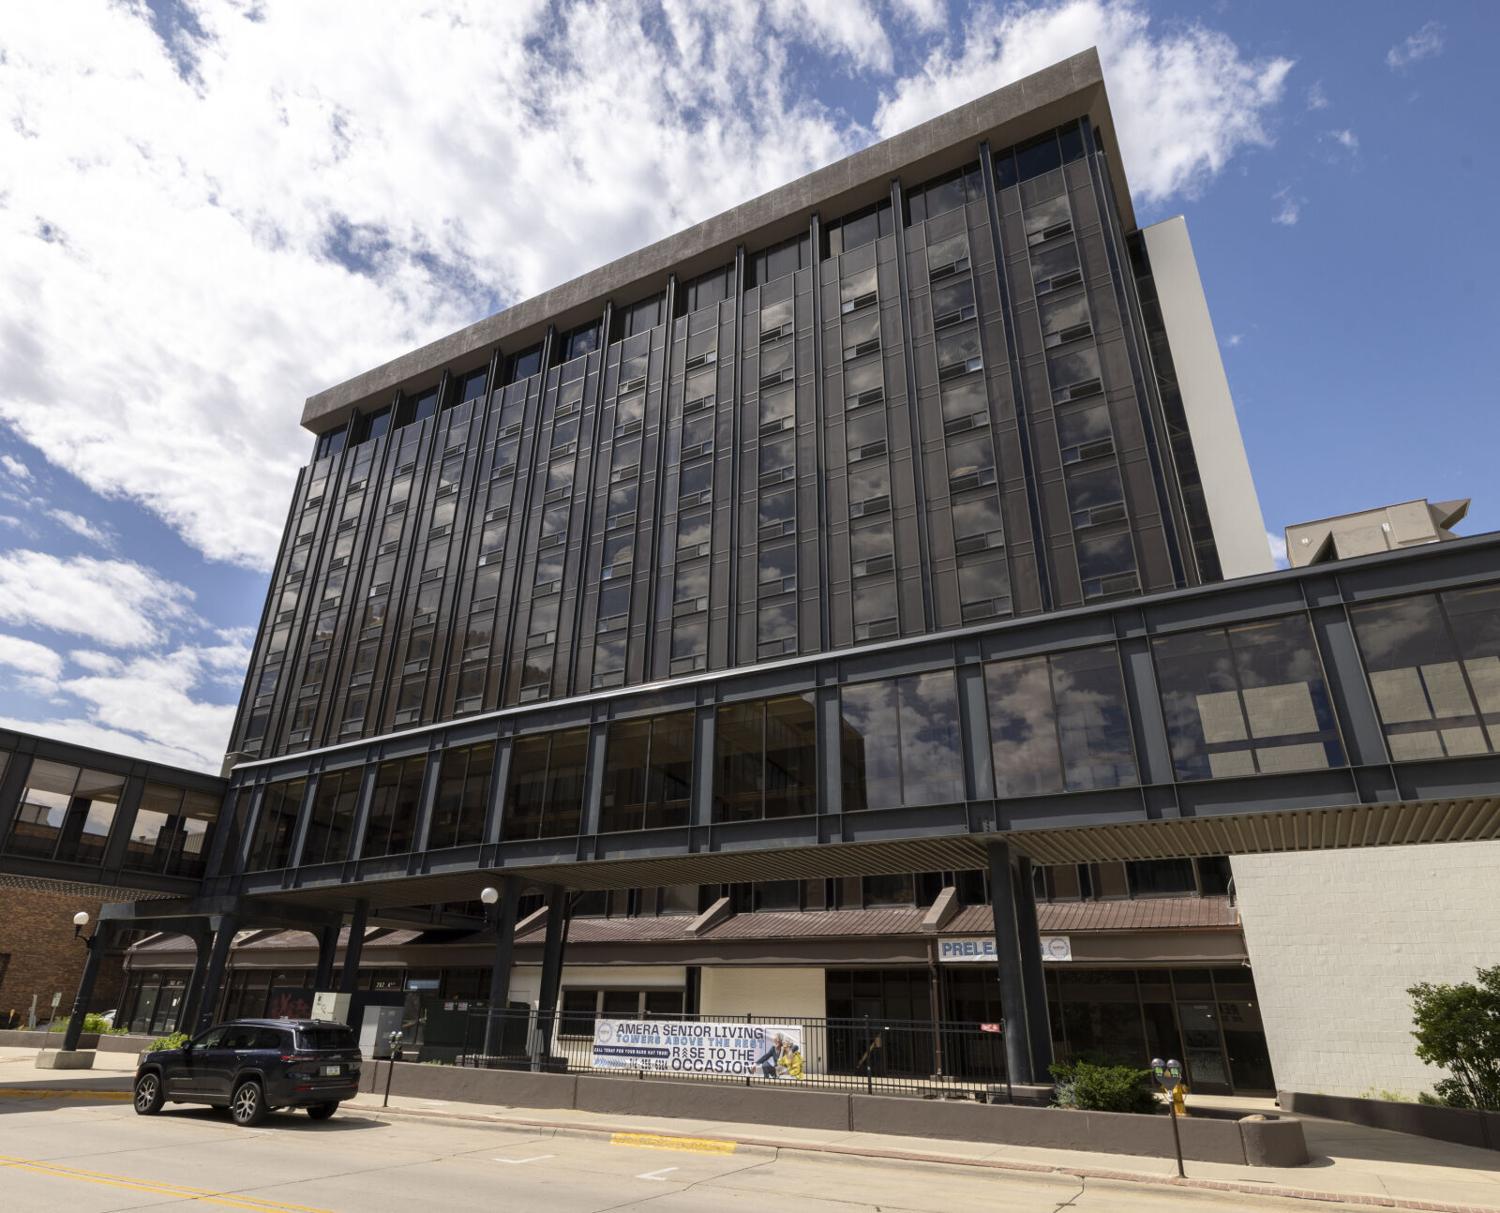 Former downtown Sioux City hotel becoming senior housing [Video]